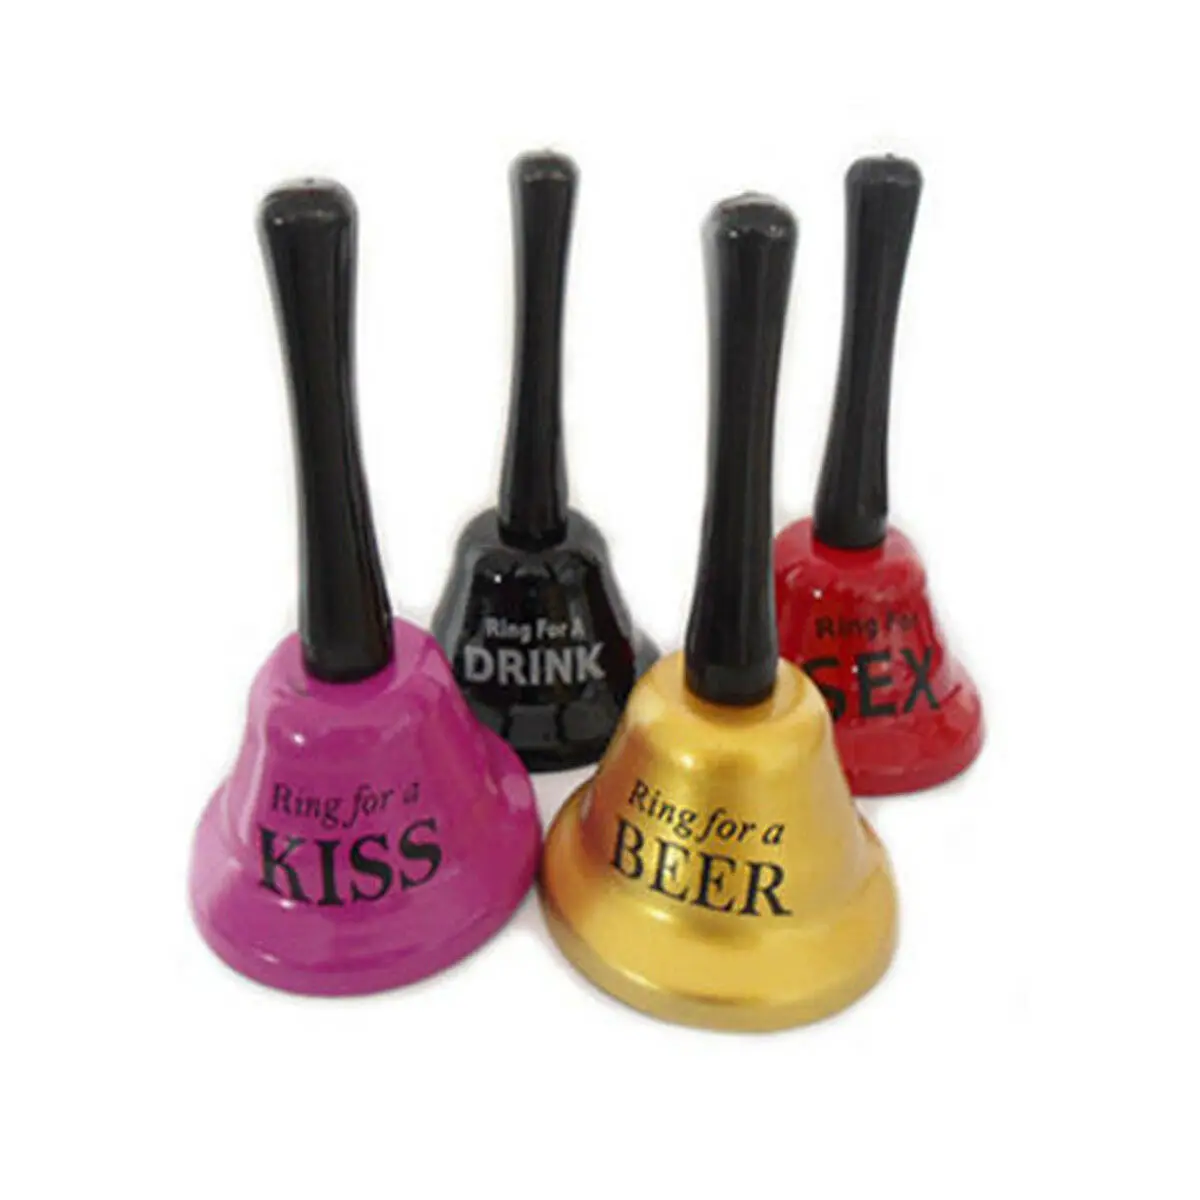 Ring for Kiss Adult Handbell Beer Drink Table Bells Fun Hen Party Gag Gift 